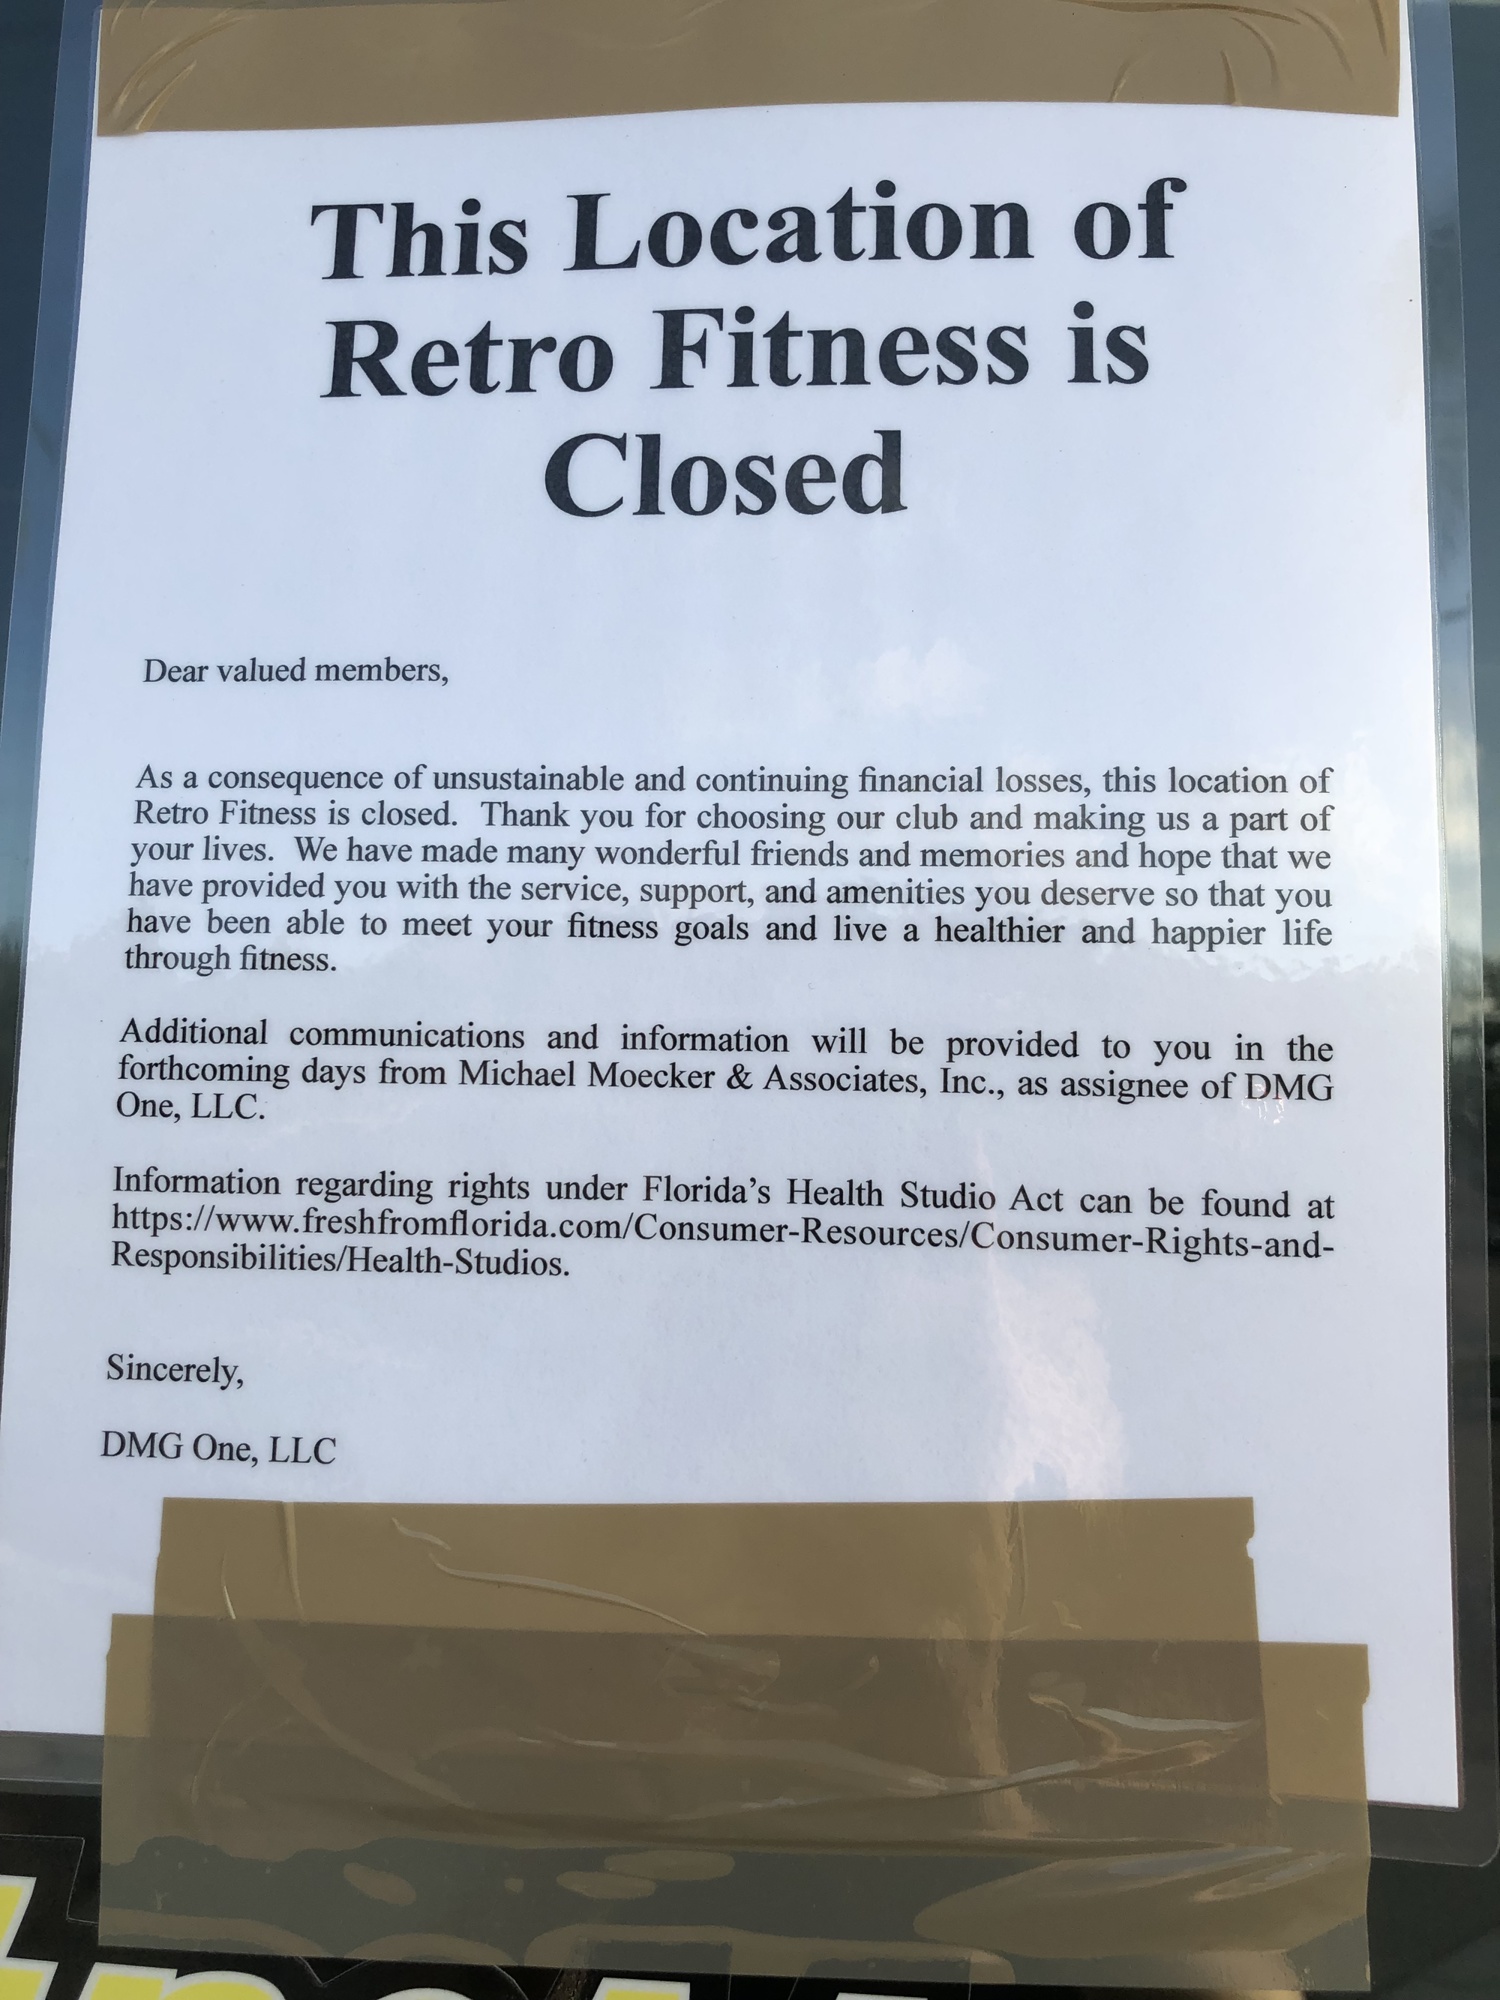 Signs on the door of Retro Fitness in Harbour Village says the location at 13475 Atlantic Blvd. is closed because of financial losses.